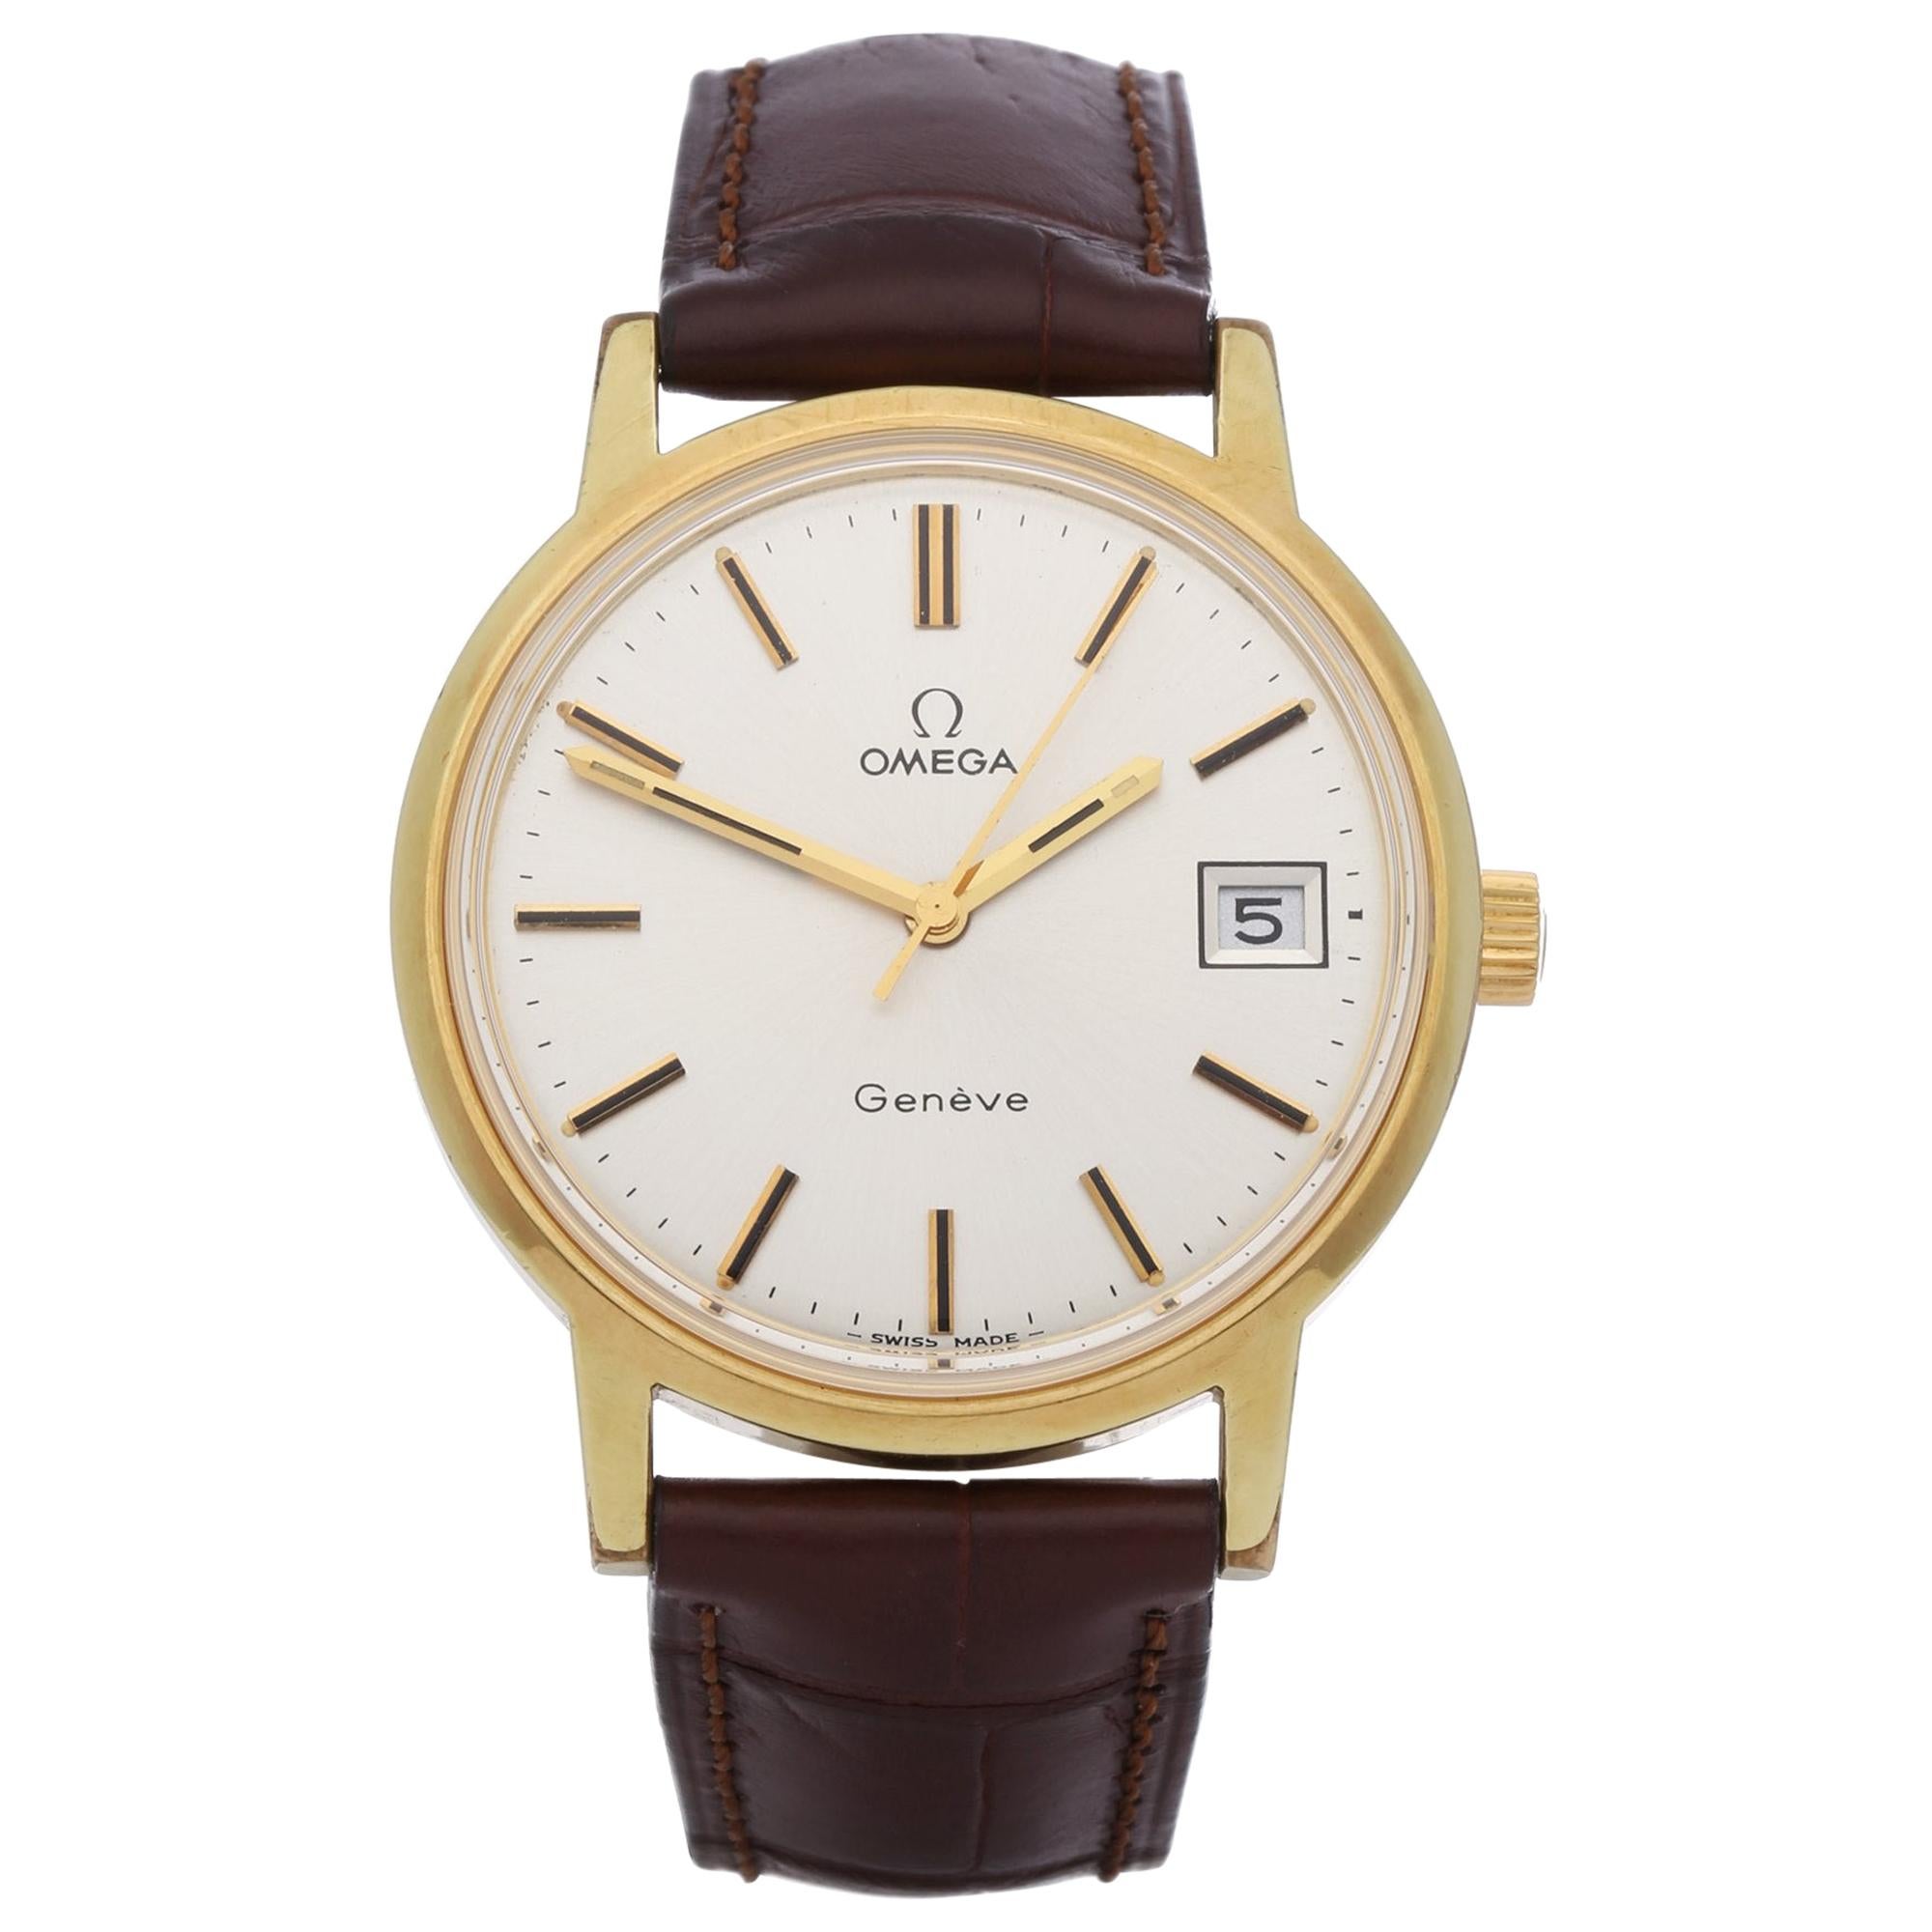 Omega Vintage 1360099 Men's Yellow Gold Watch